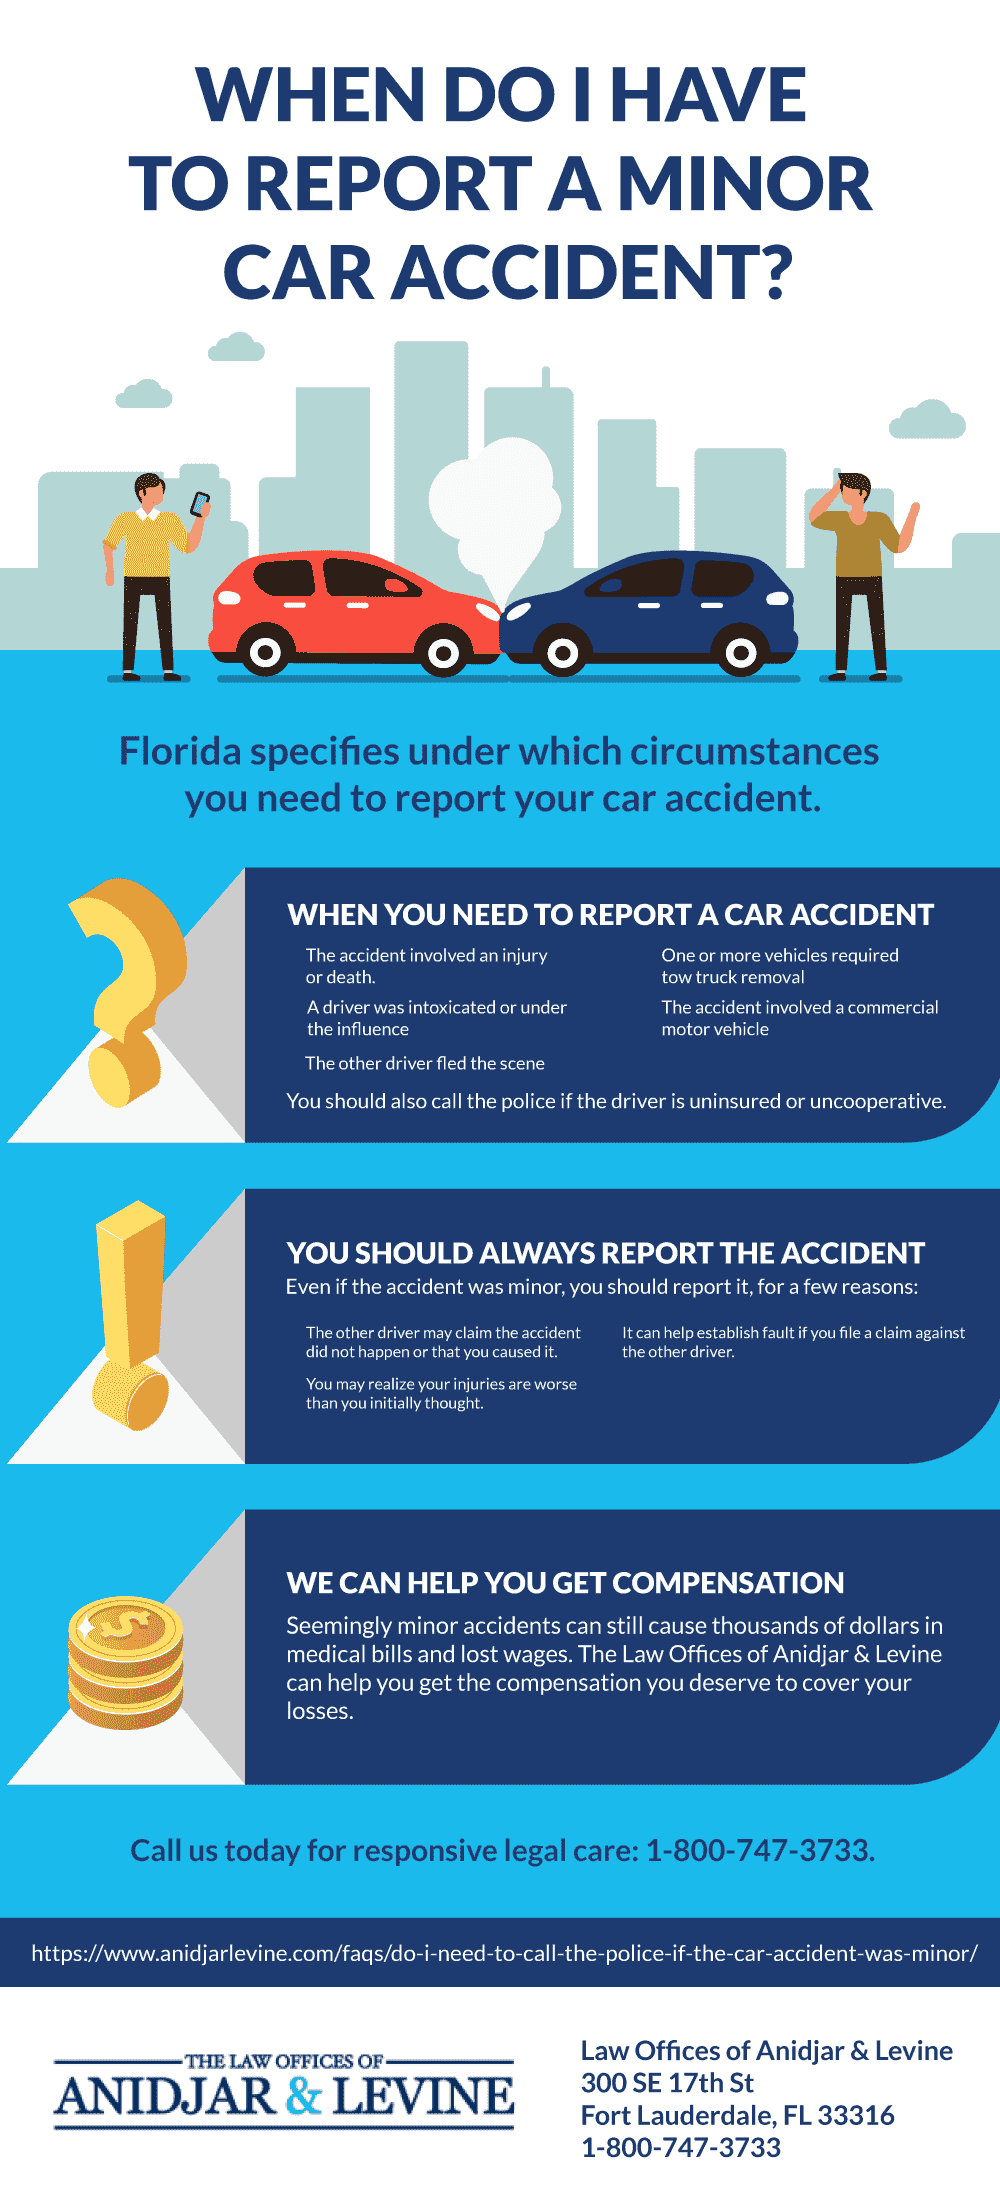 Do I Need to Call the Police if the Car Accident Was Minor?